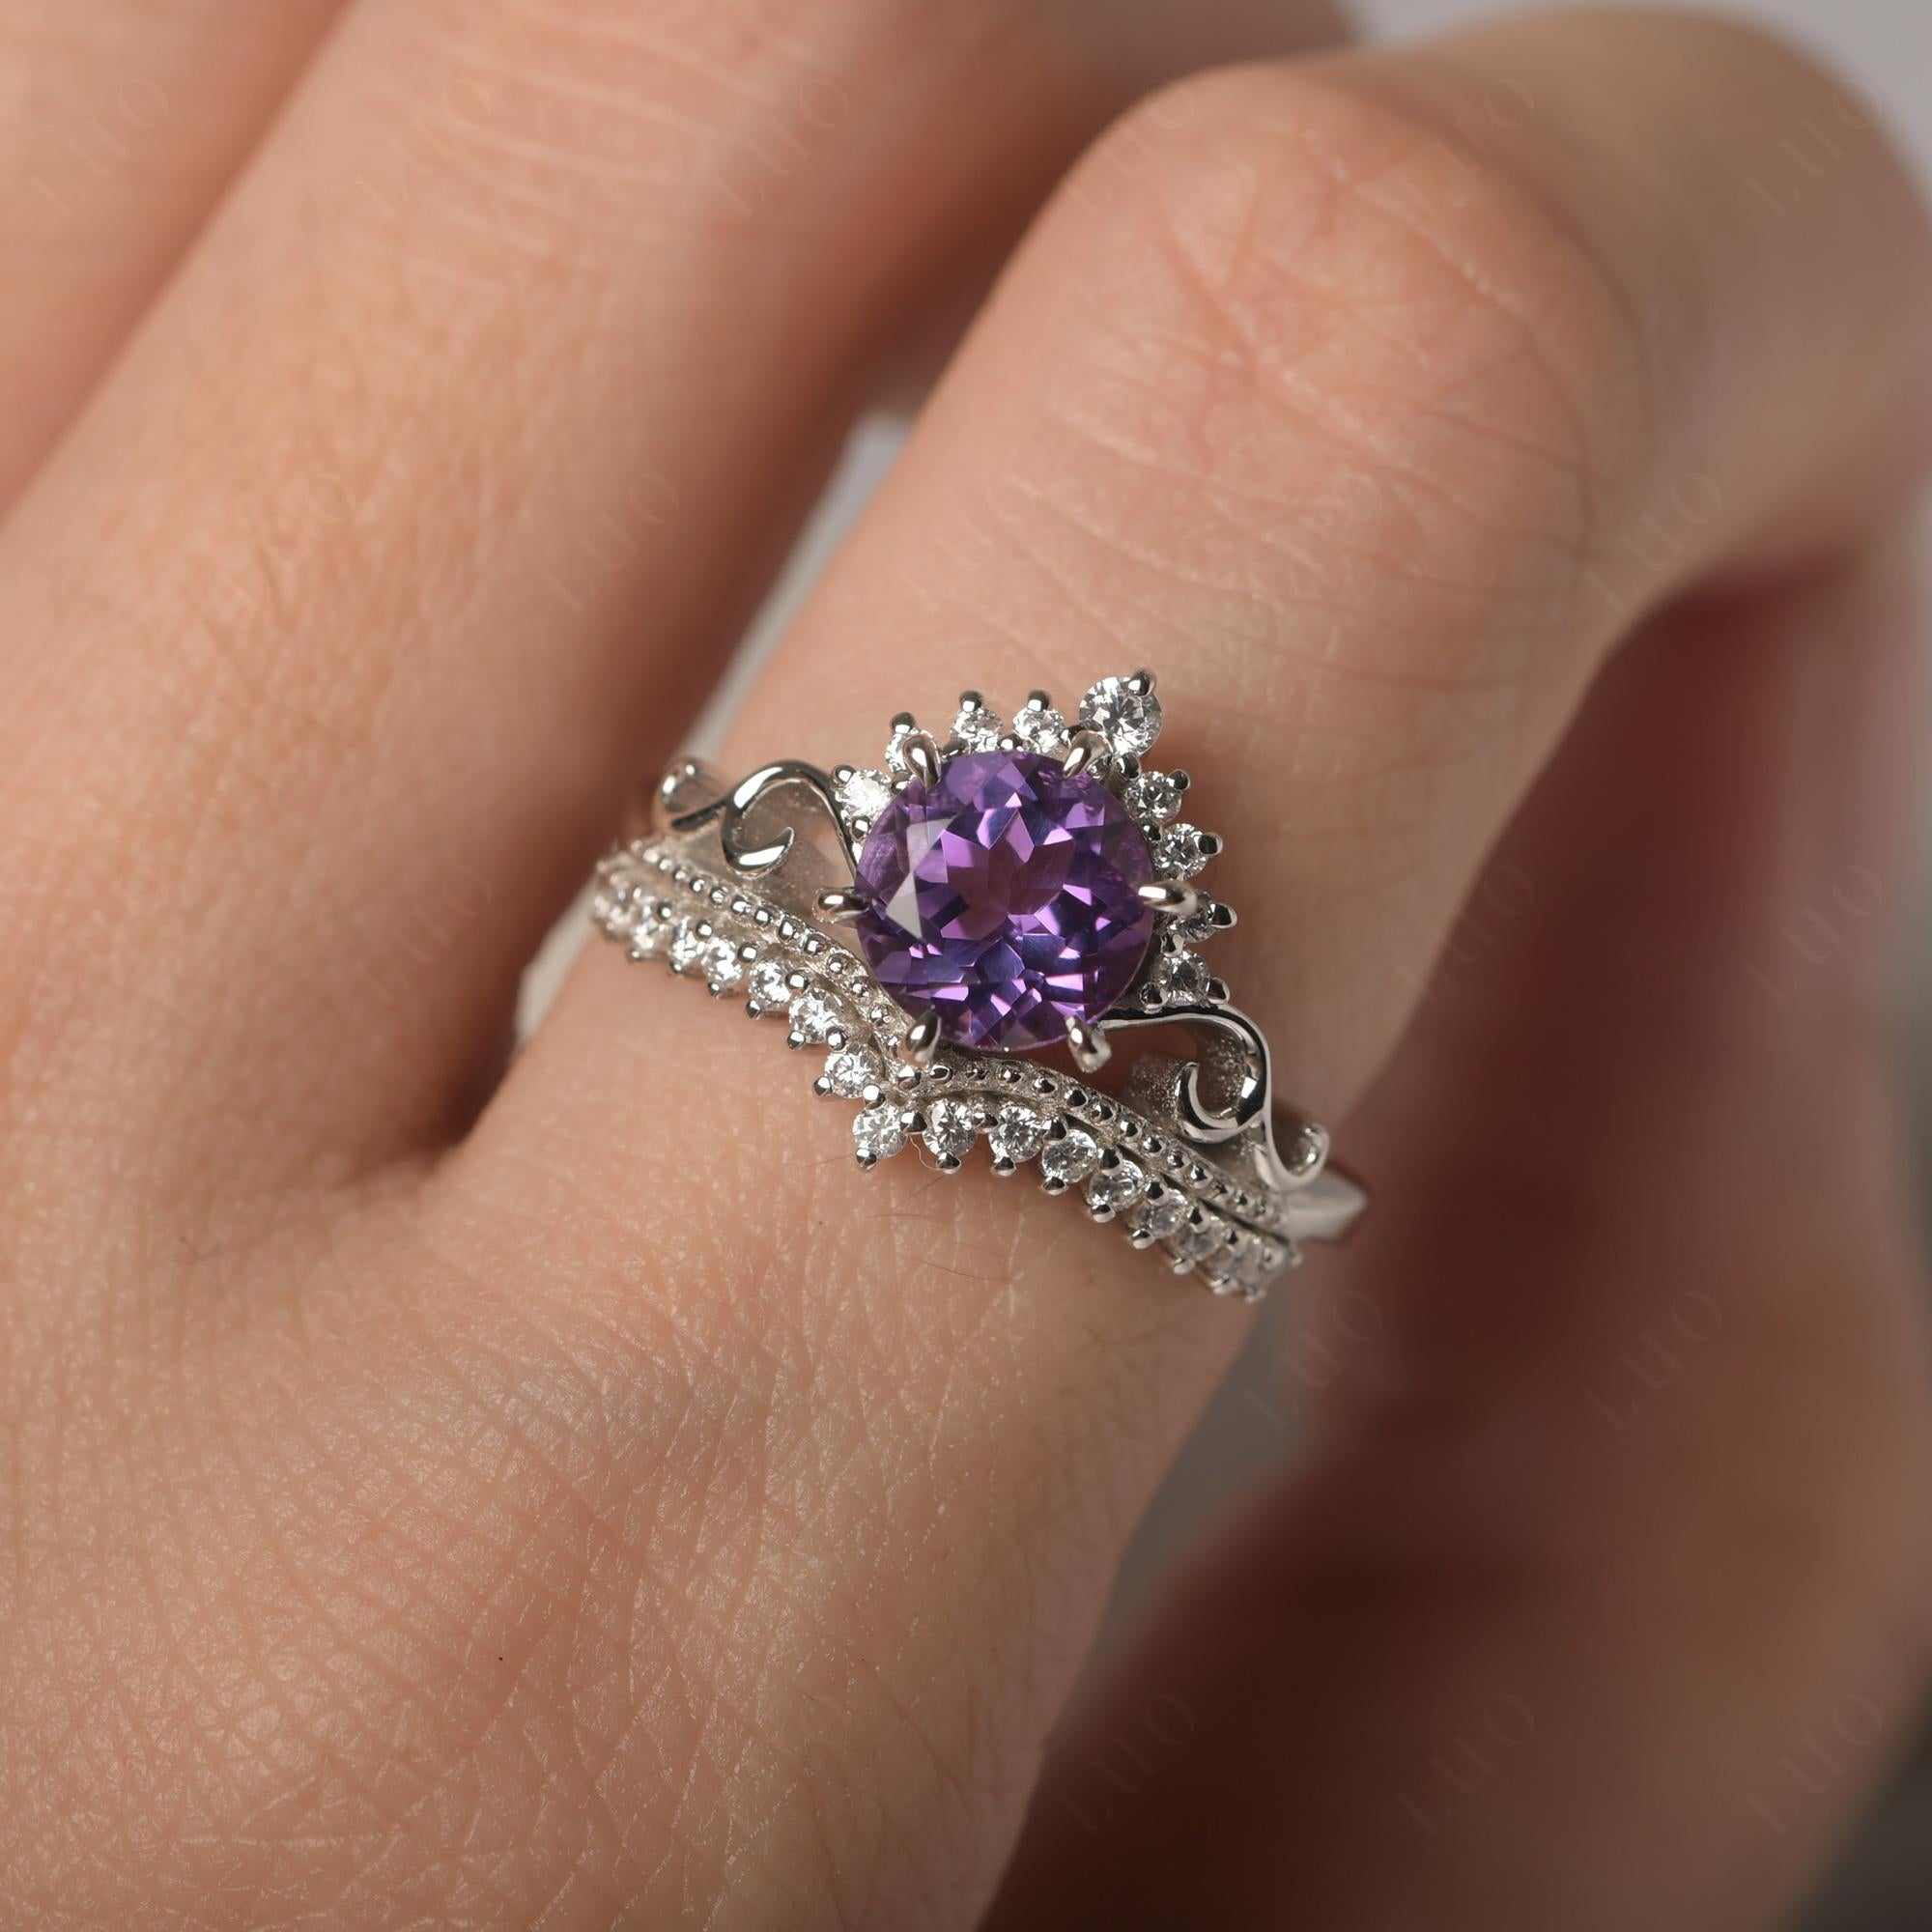 Vintage Amethyst Cocktail Ring - LUO Jewelry